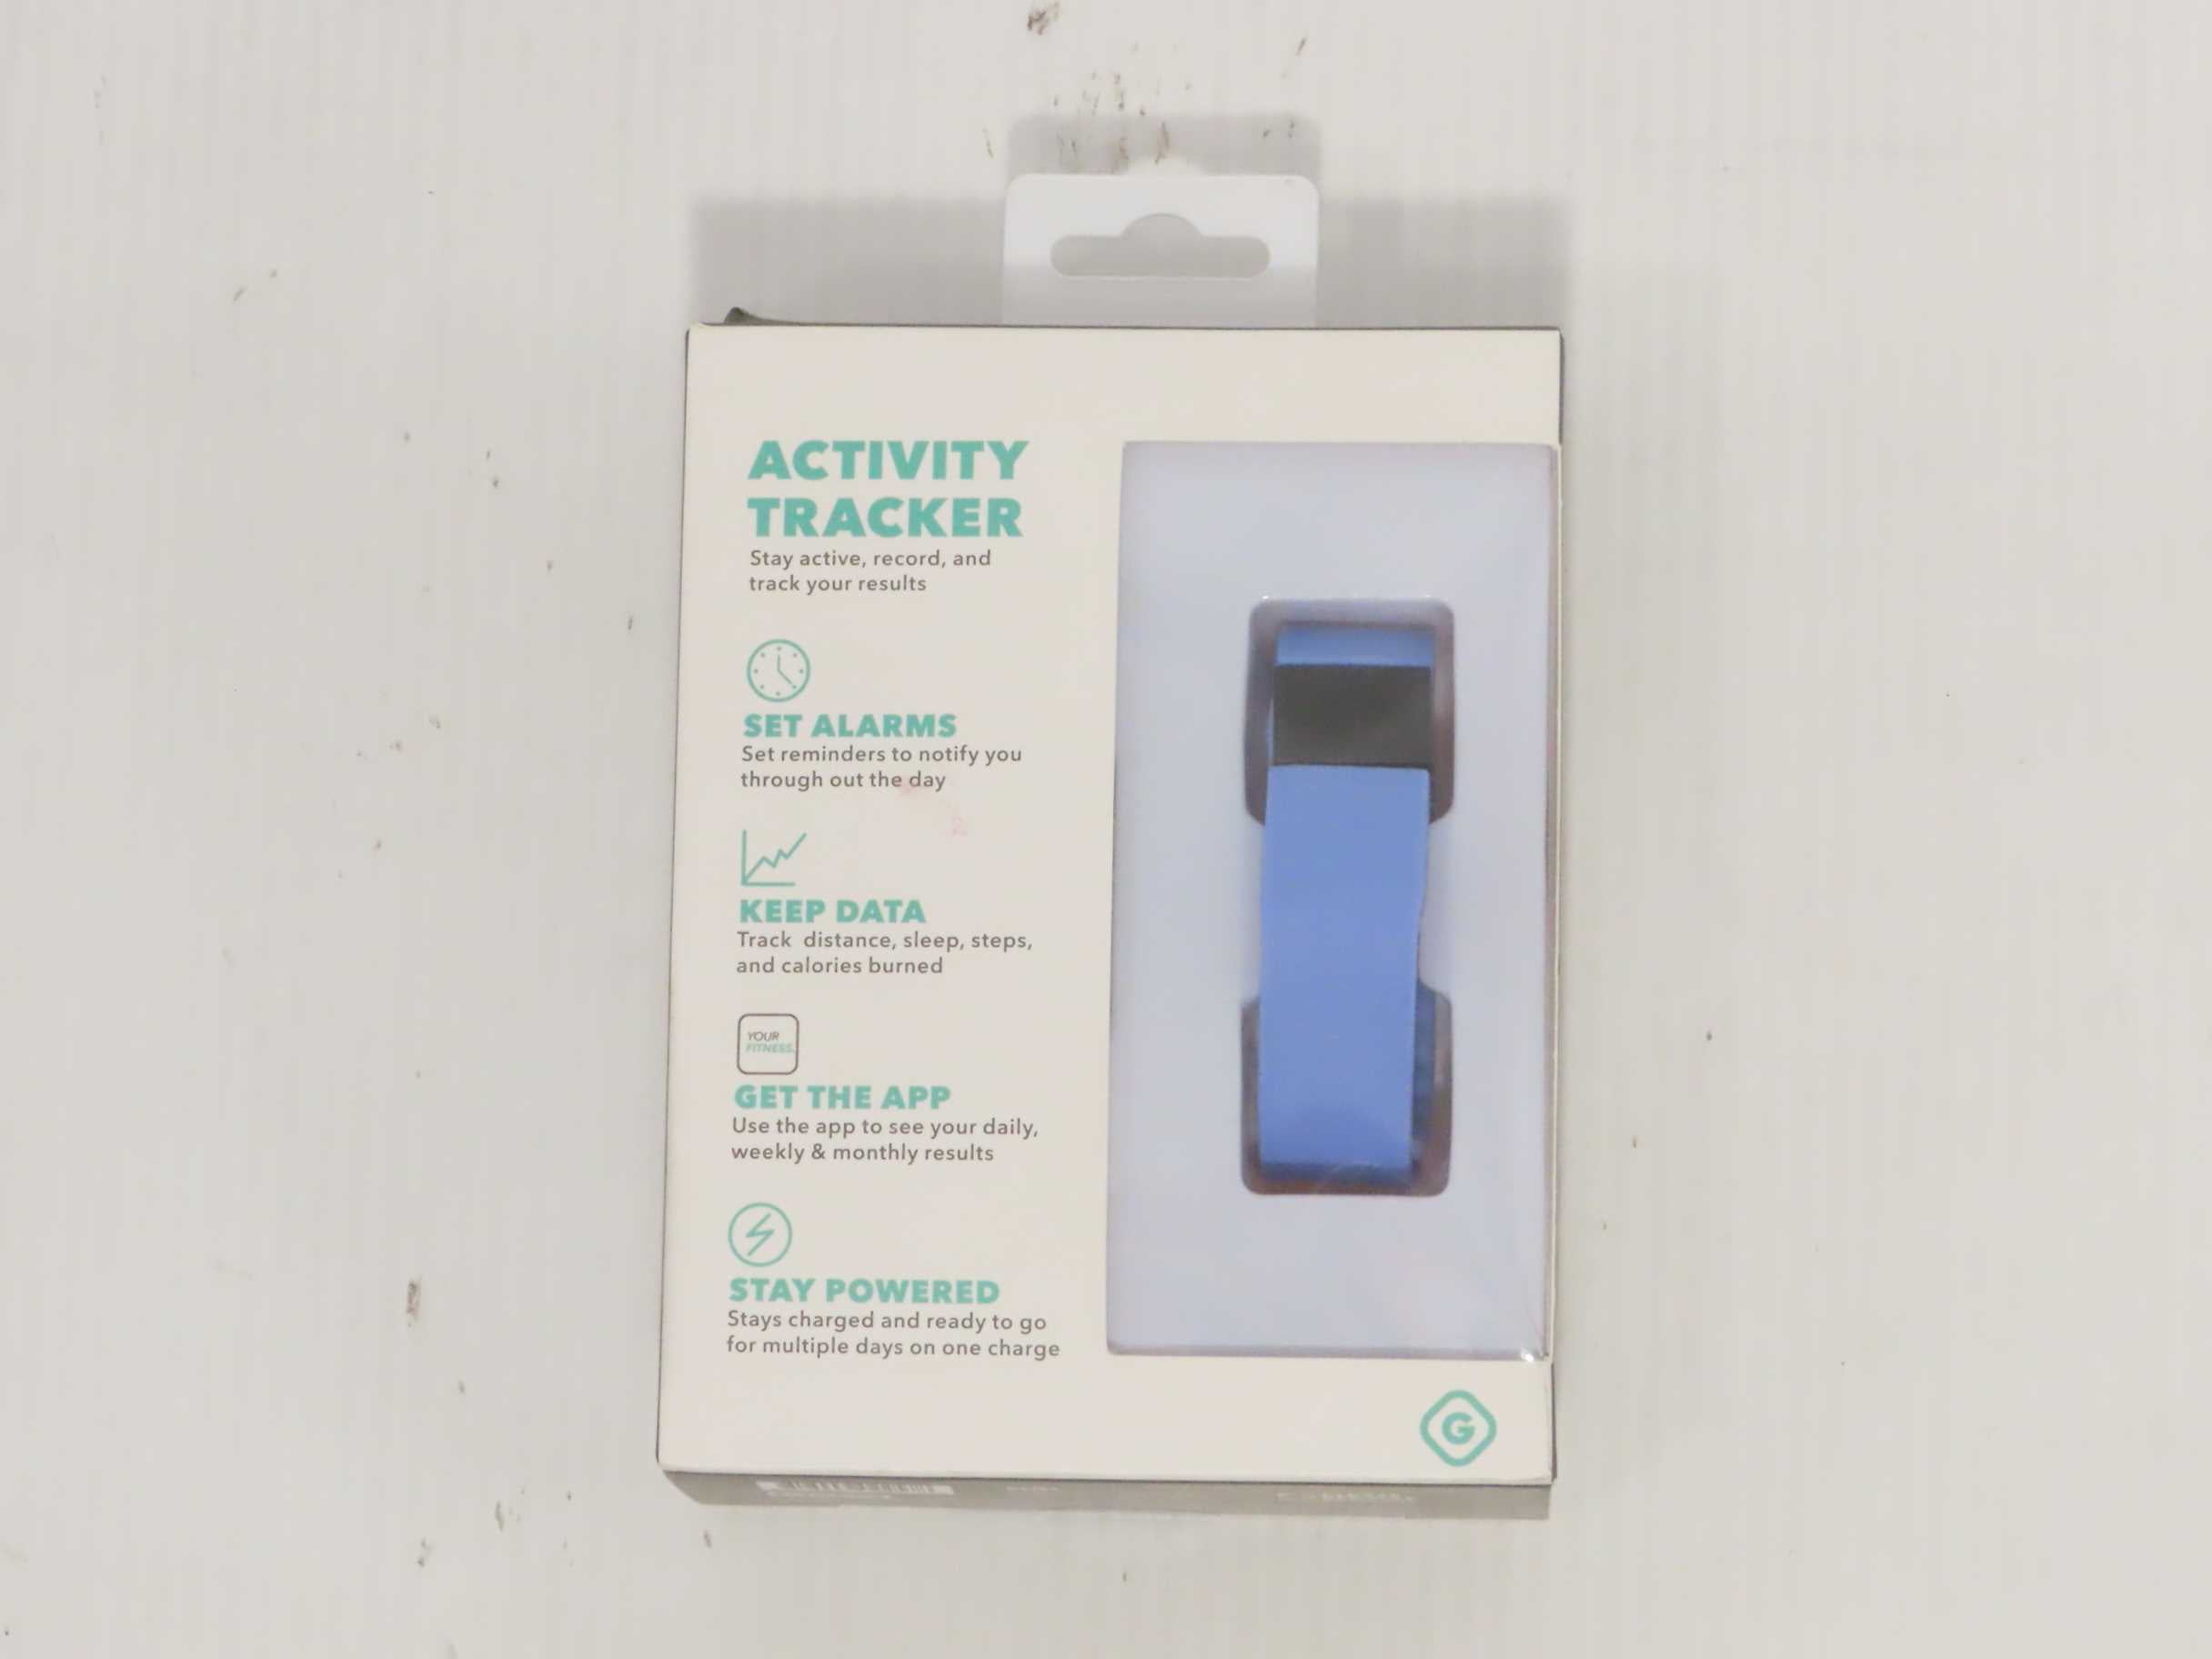 Tracks Distance Activity Tracker by GEMS Teal sleep MORE Calories burned 